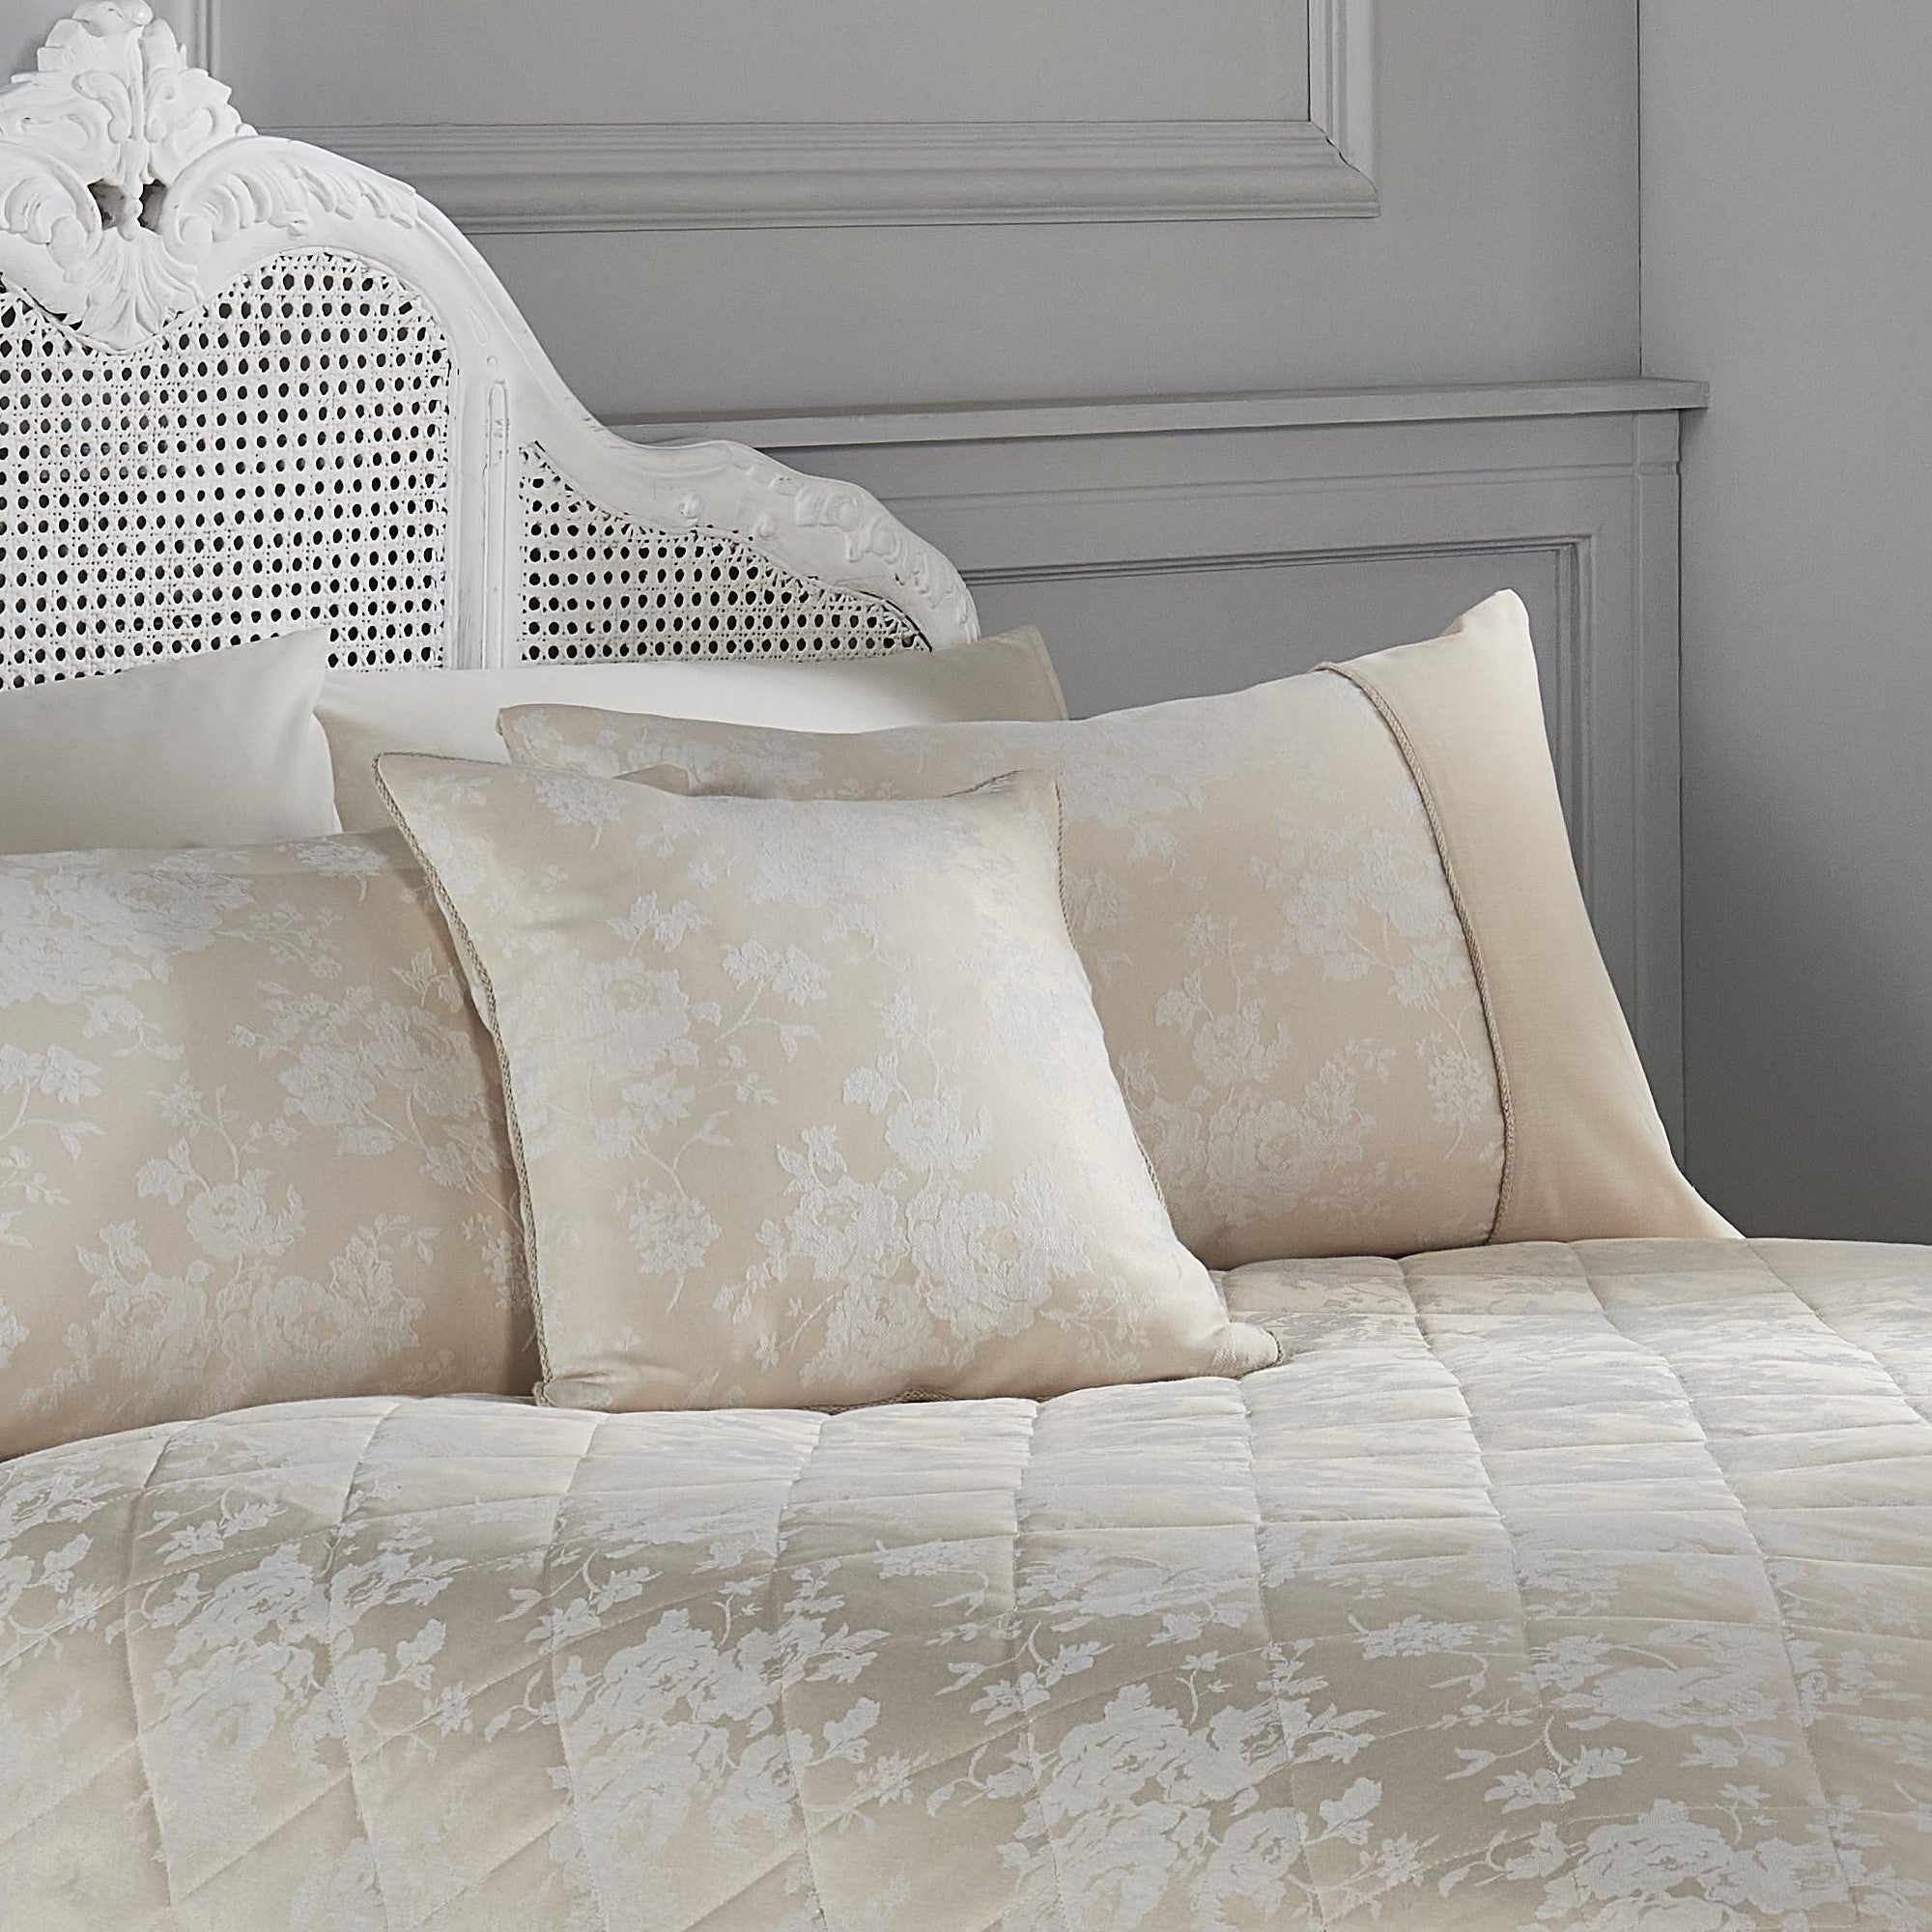 Filled Cushion Imelda by Dreams & Drapes Woven in Ivory